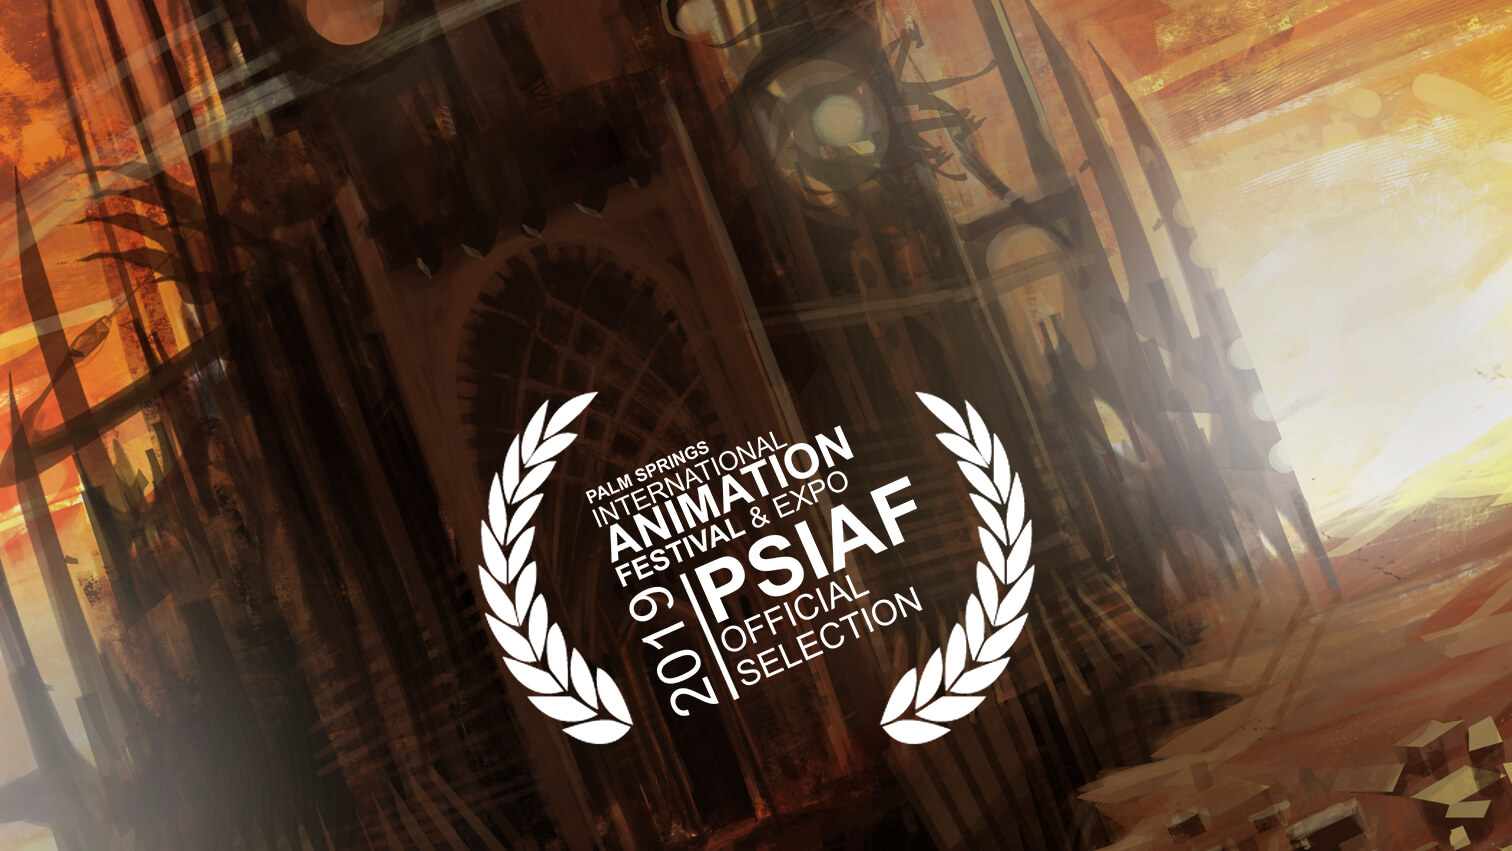 The Last Fiction Nominated for Best Animated Feature in PSIAF